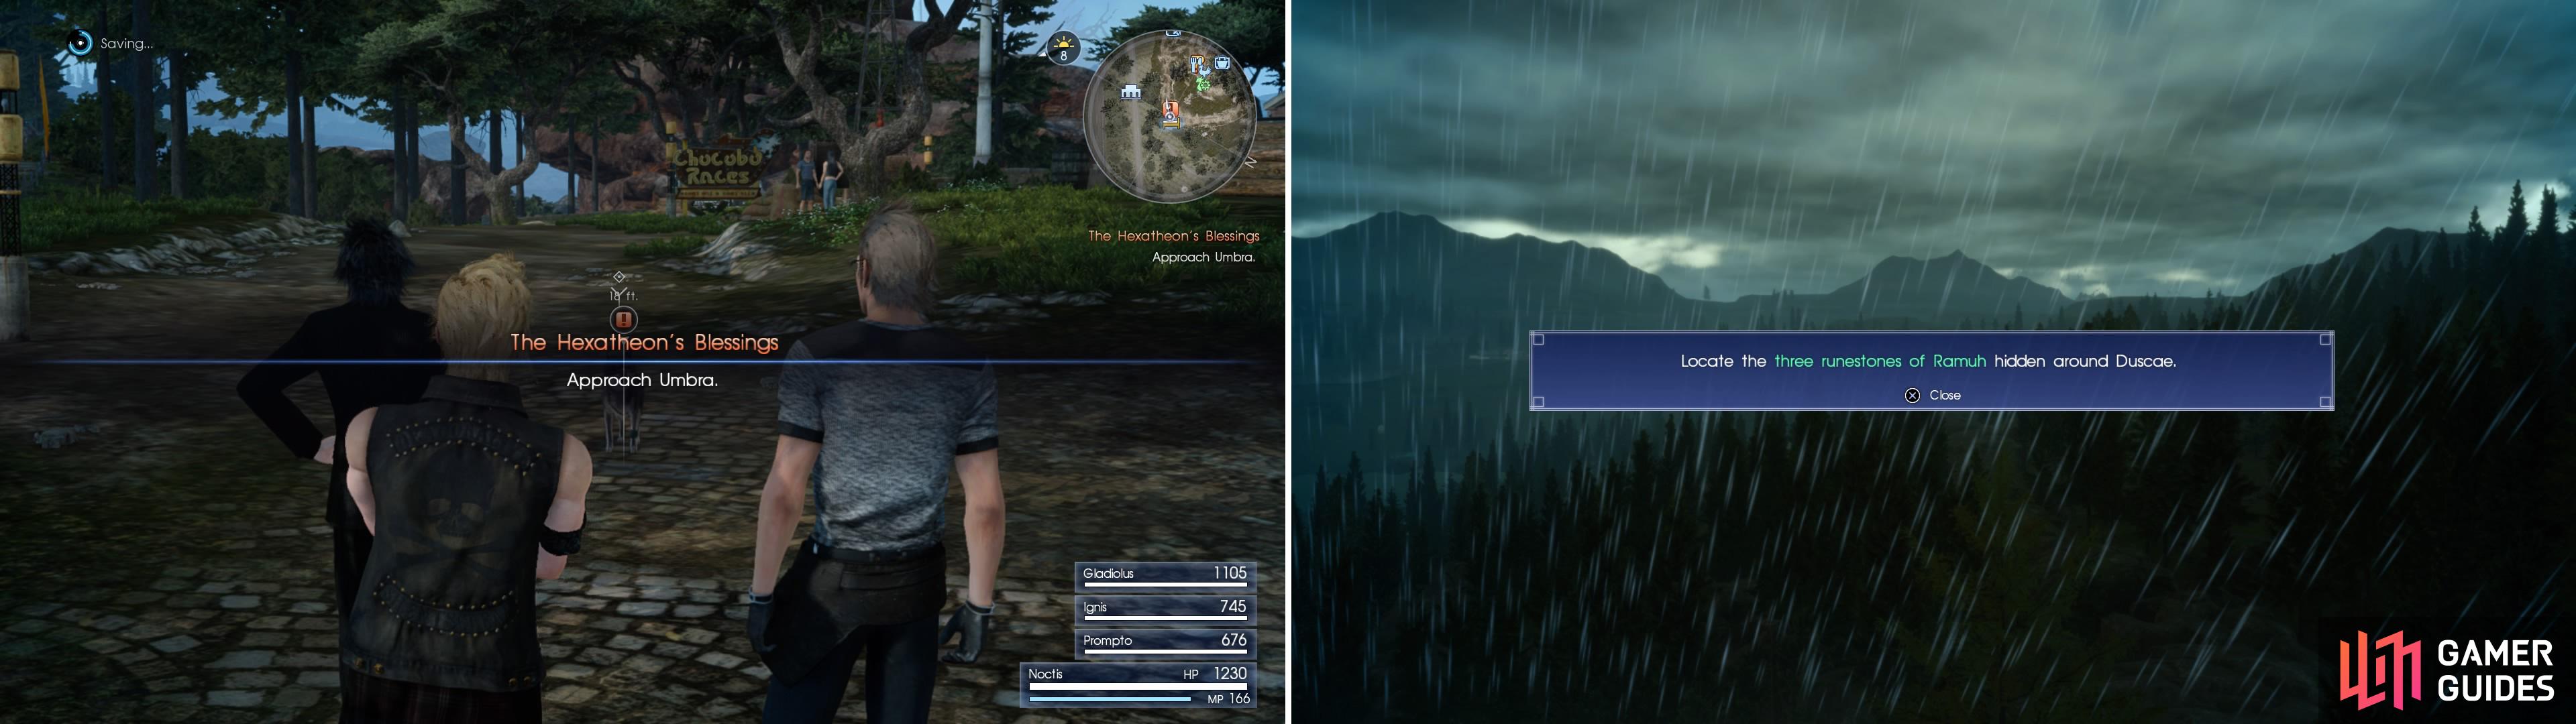 Follow Umbra (left) to meet with Gentiana and then prepare to find Ramuh’s runestones (right).